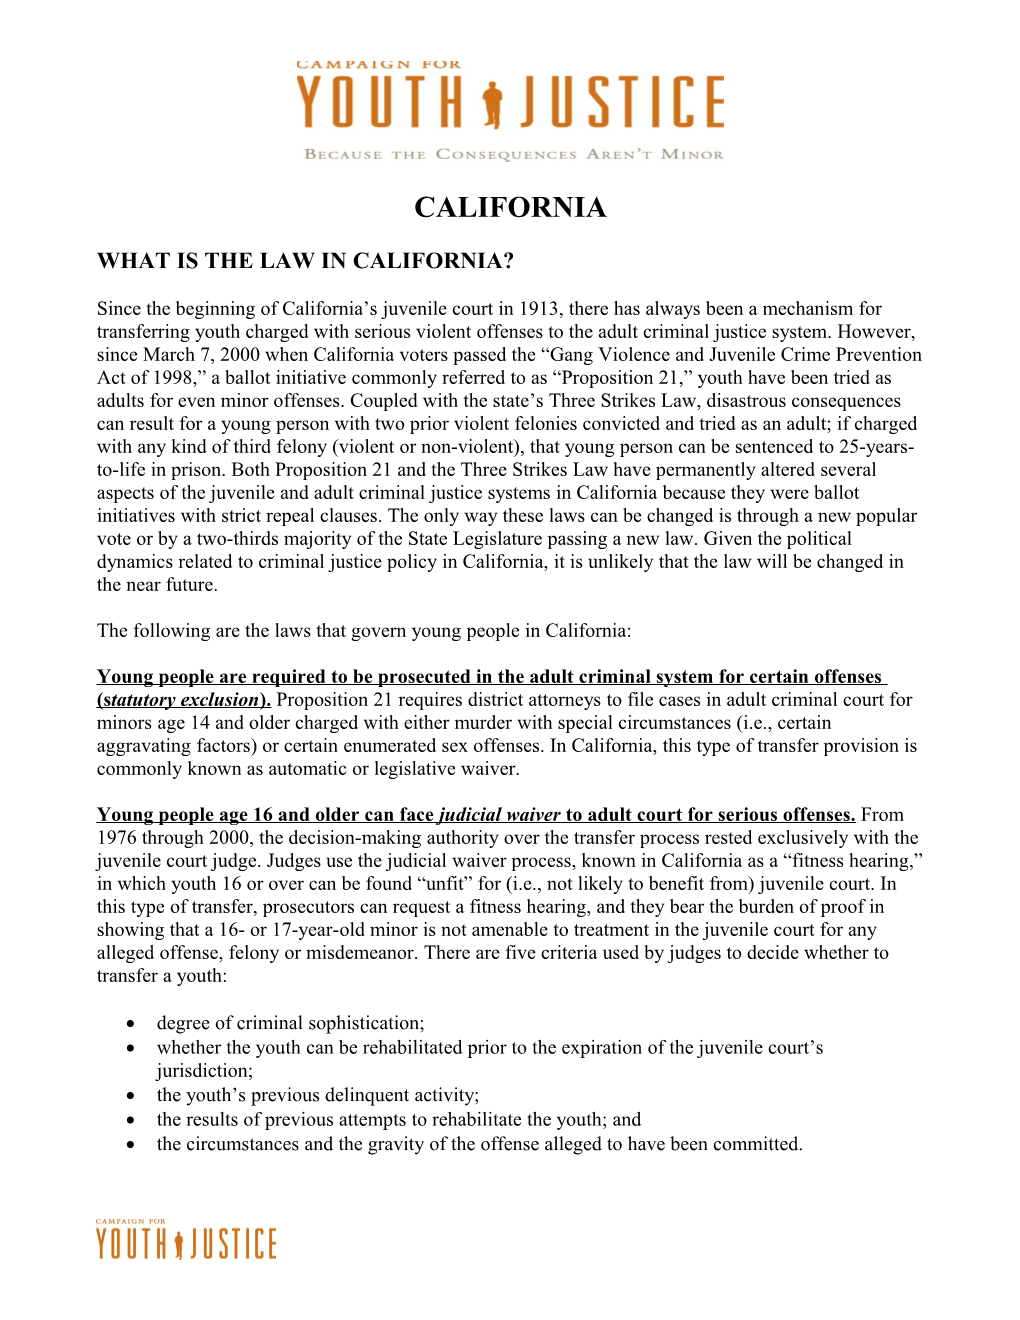 What Is the Law in California